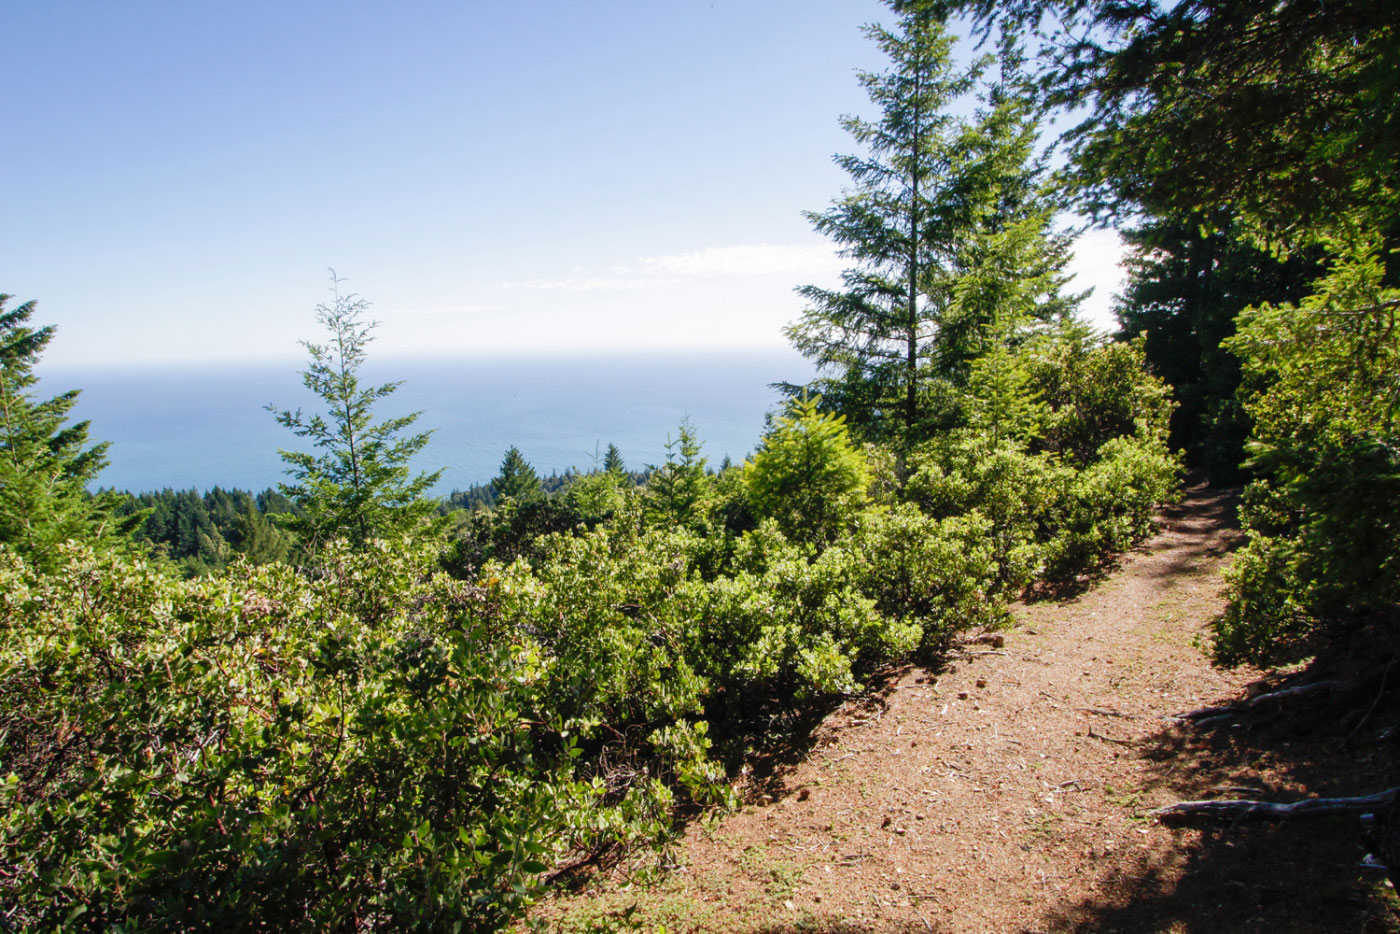 Hike Chamisal Mountain via Lost Coast Trail in King Range National Conservation Area, California - Stav is Lost